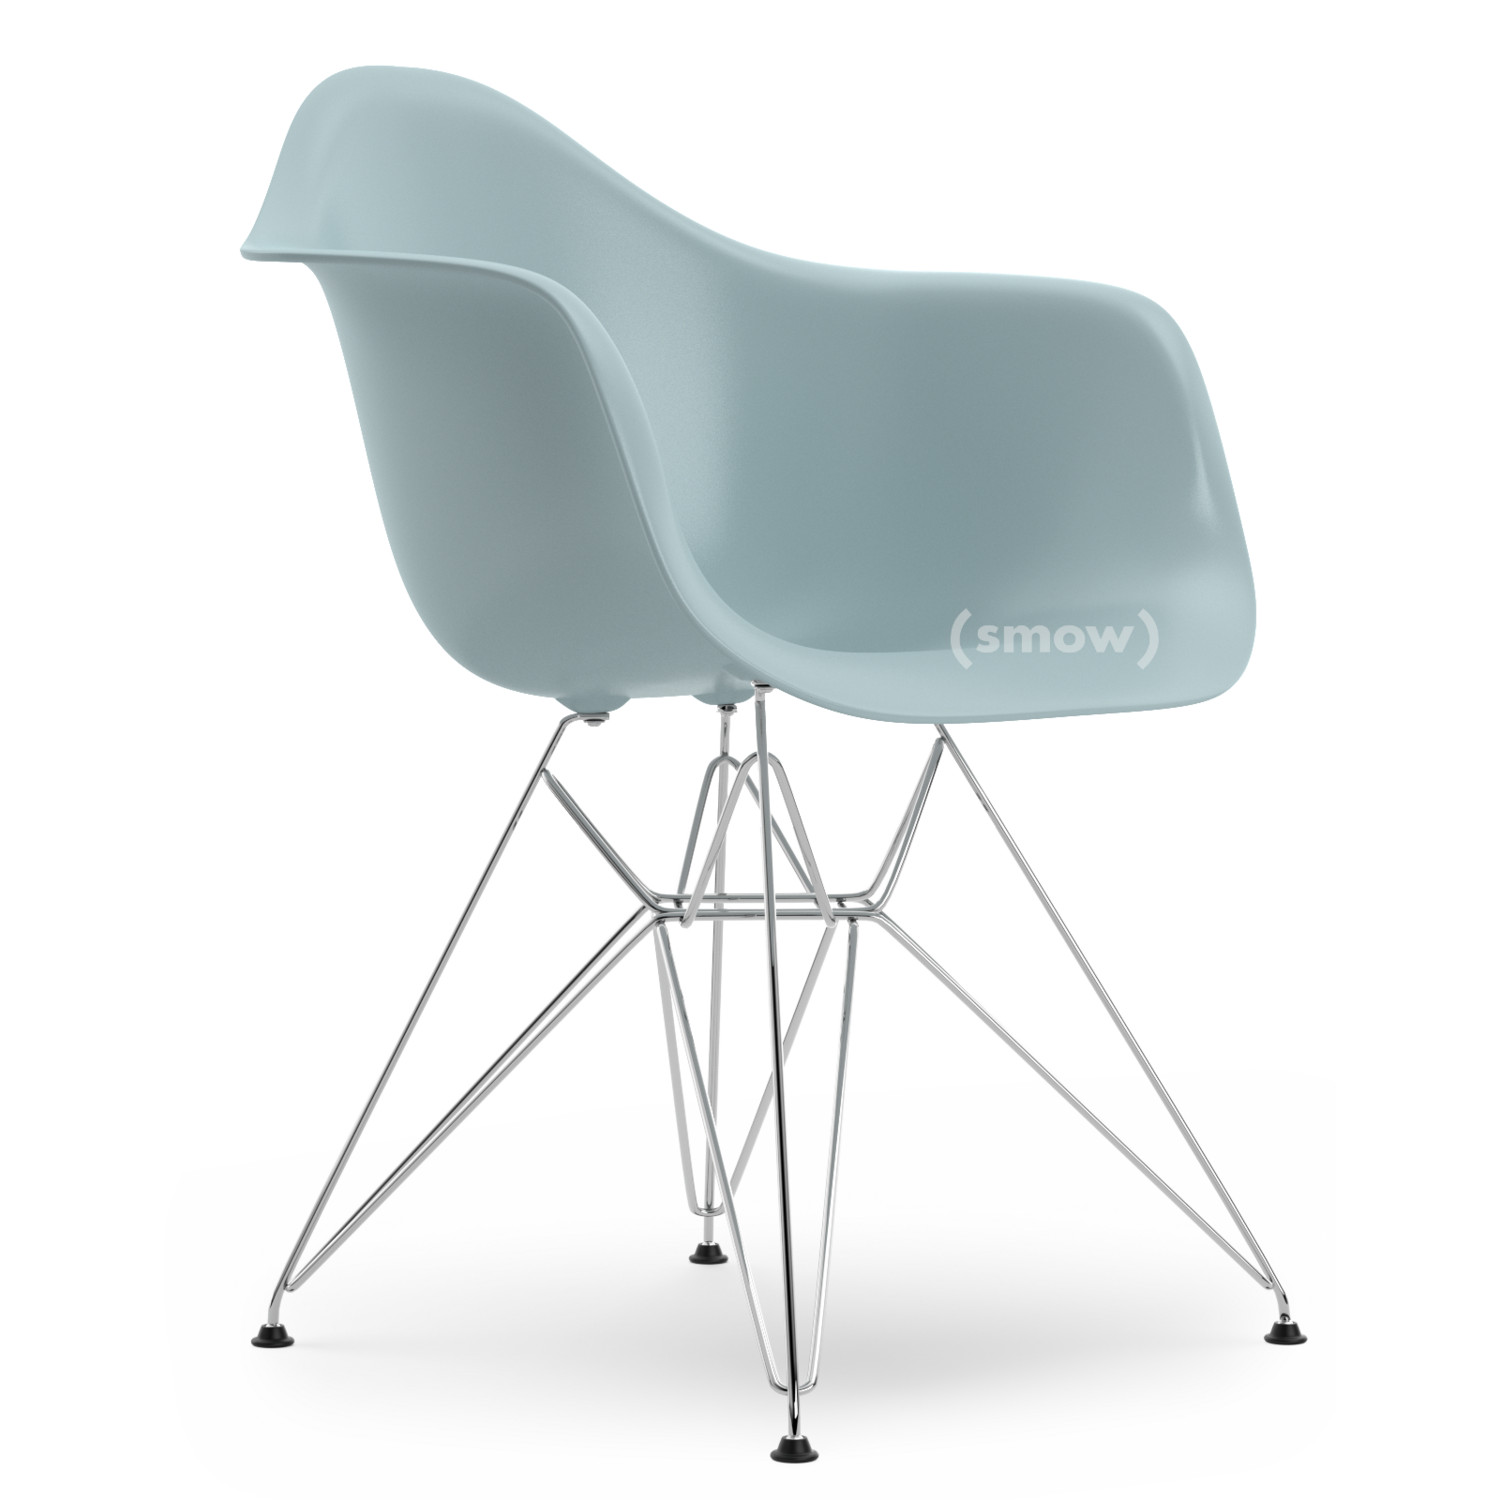 Eames Plastic Armchair DAR by Charles & Ray Eames, 1950 - Designer furniture by smow.com